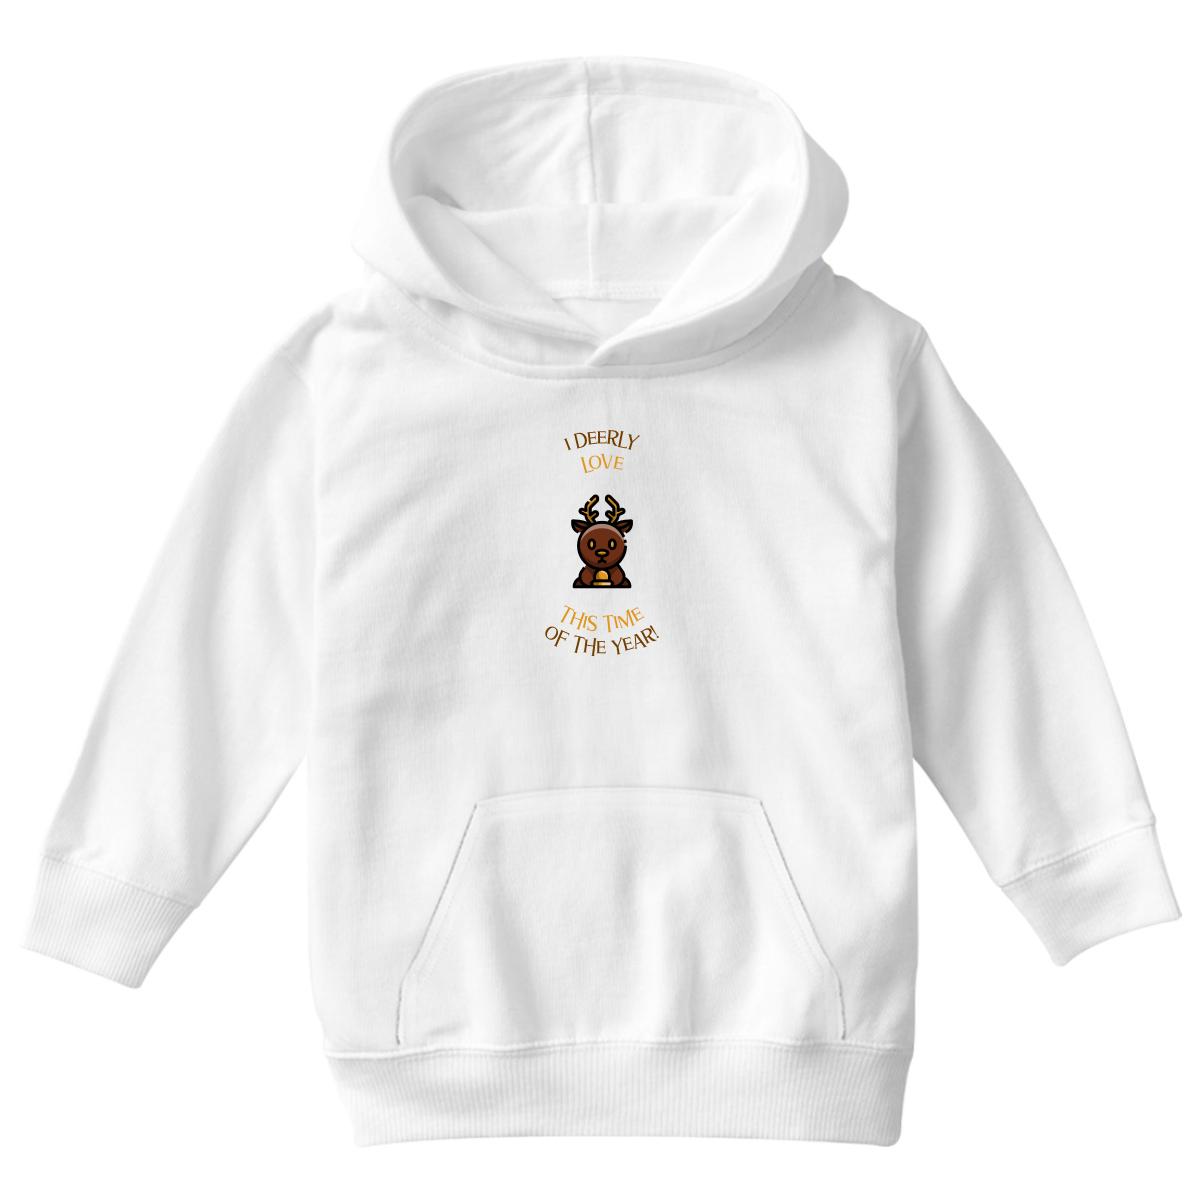 I Deerly Love This Time of the Year! Kids Hoodie | White